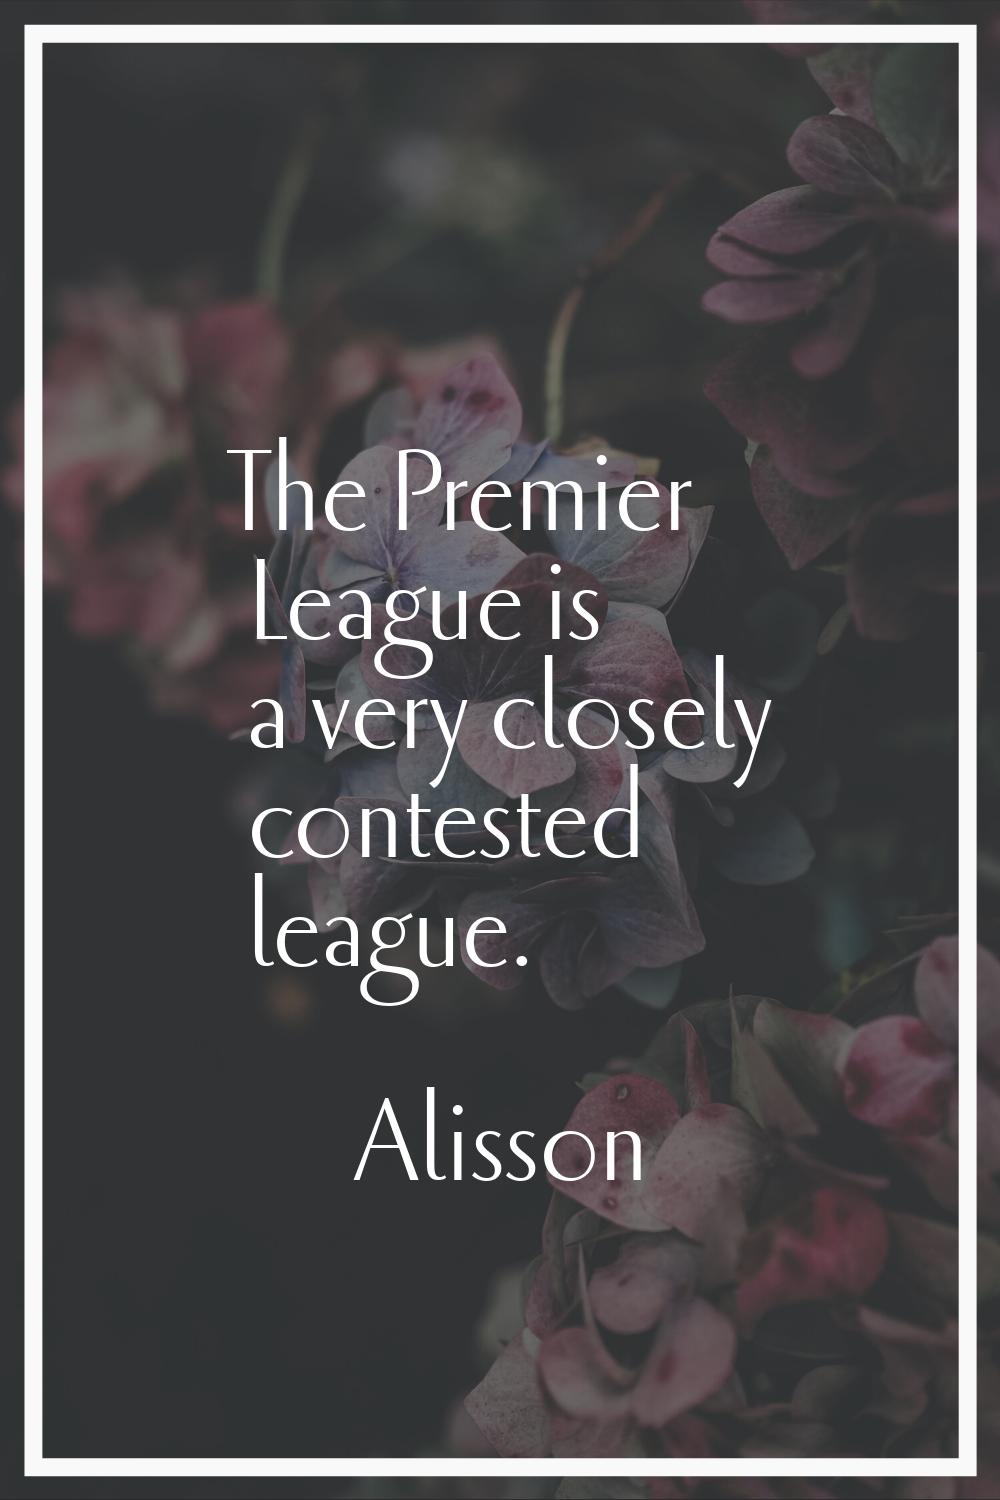 The Premier League is a very closely contested league.